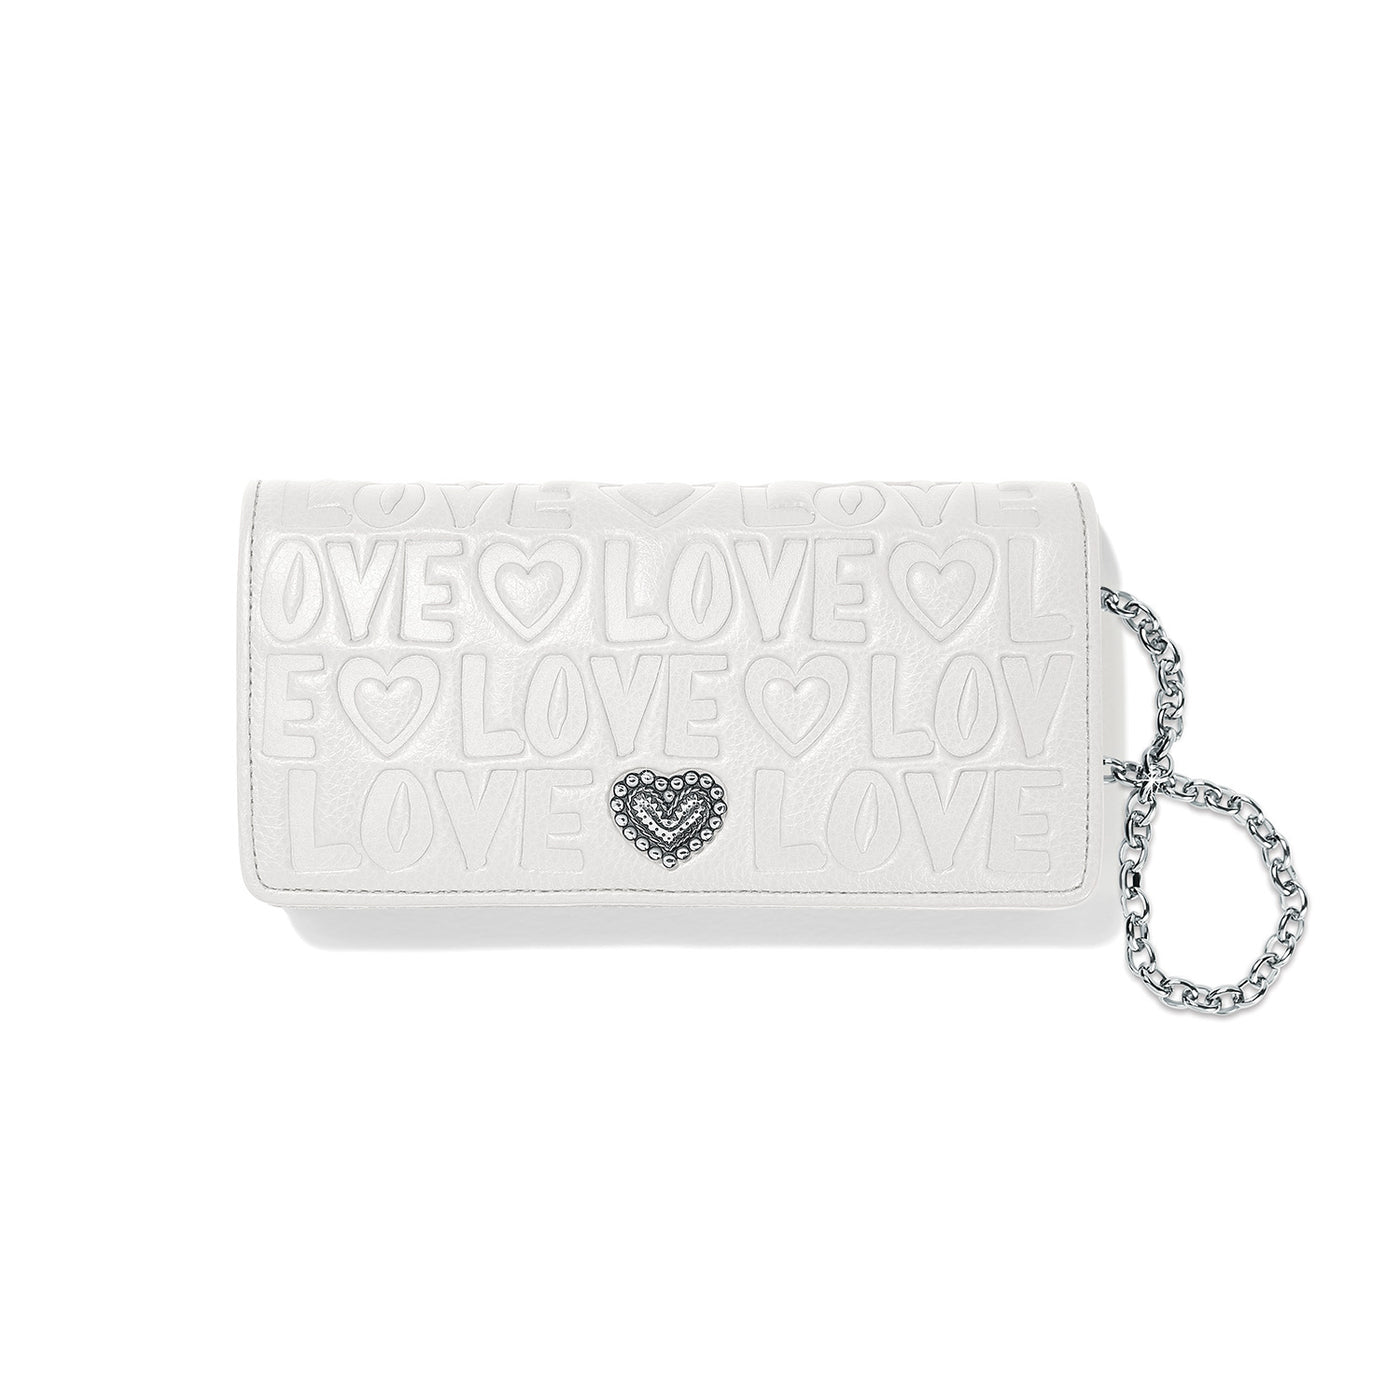 Optic White Deeply In Love Rockmore Wallet